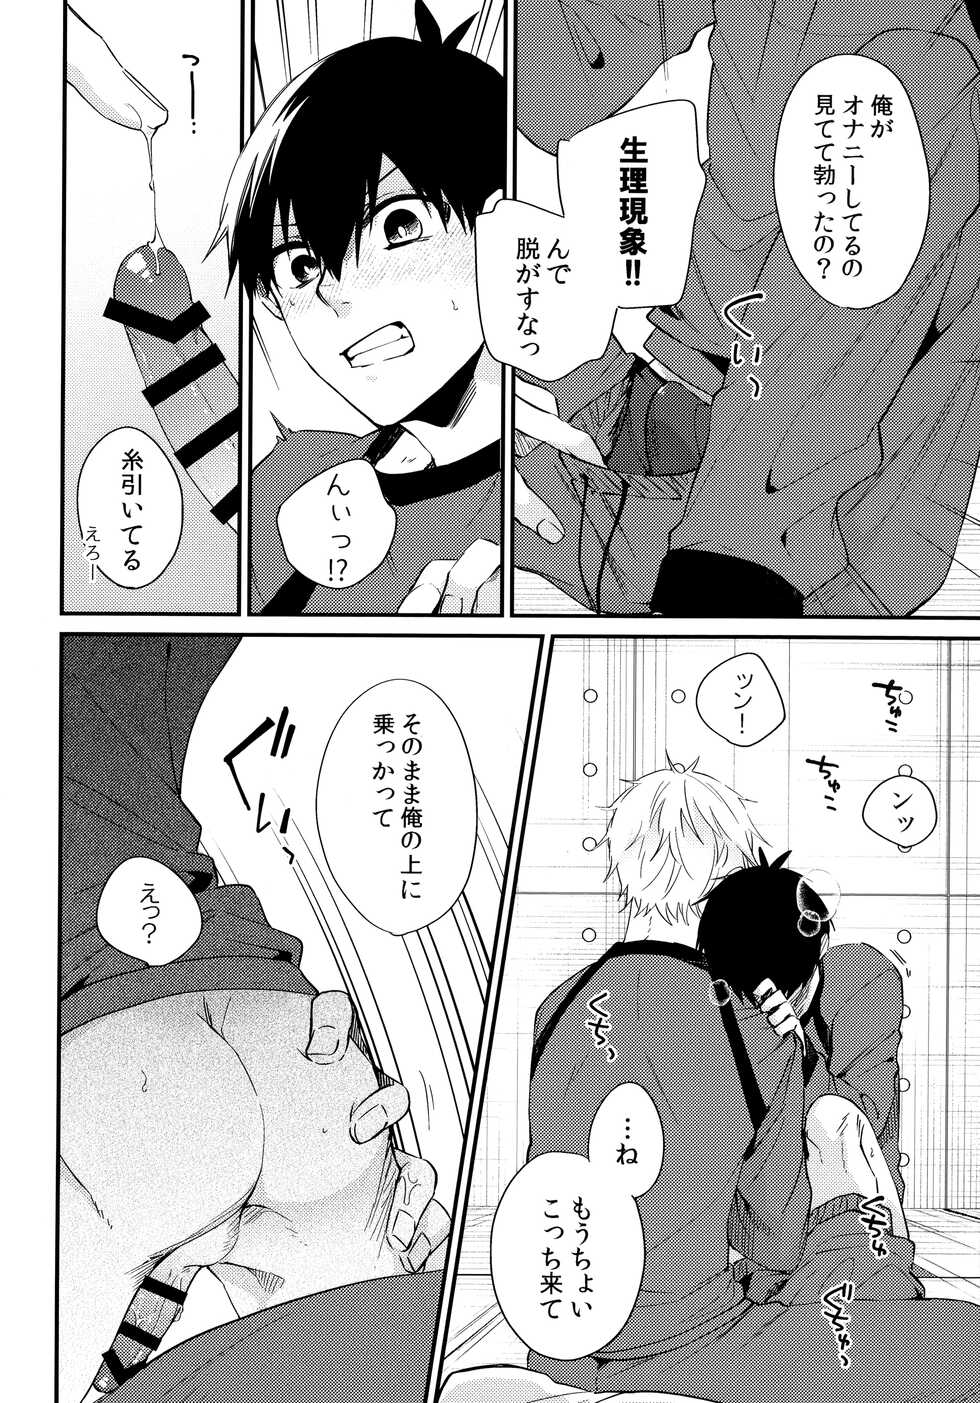 (Seishun Egoism 2) [RoLOCK (Ichi)] Motto Sawaritai - I want to touch and more (Blue Lock) - Page 15